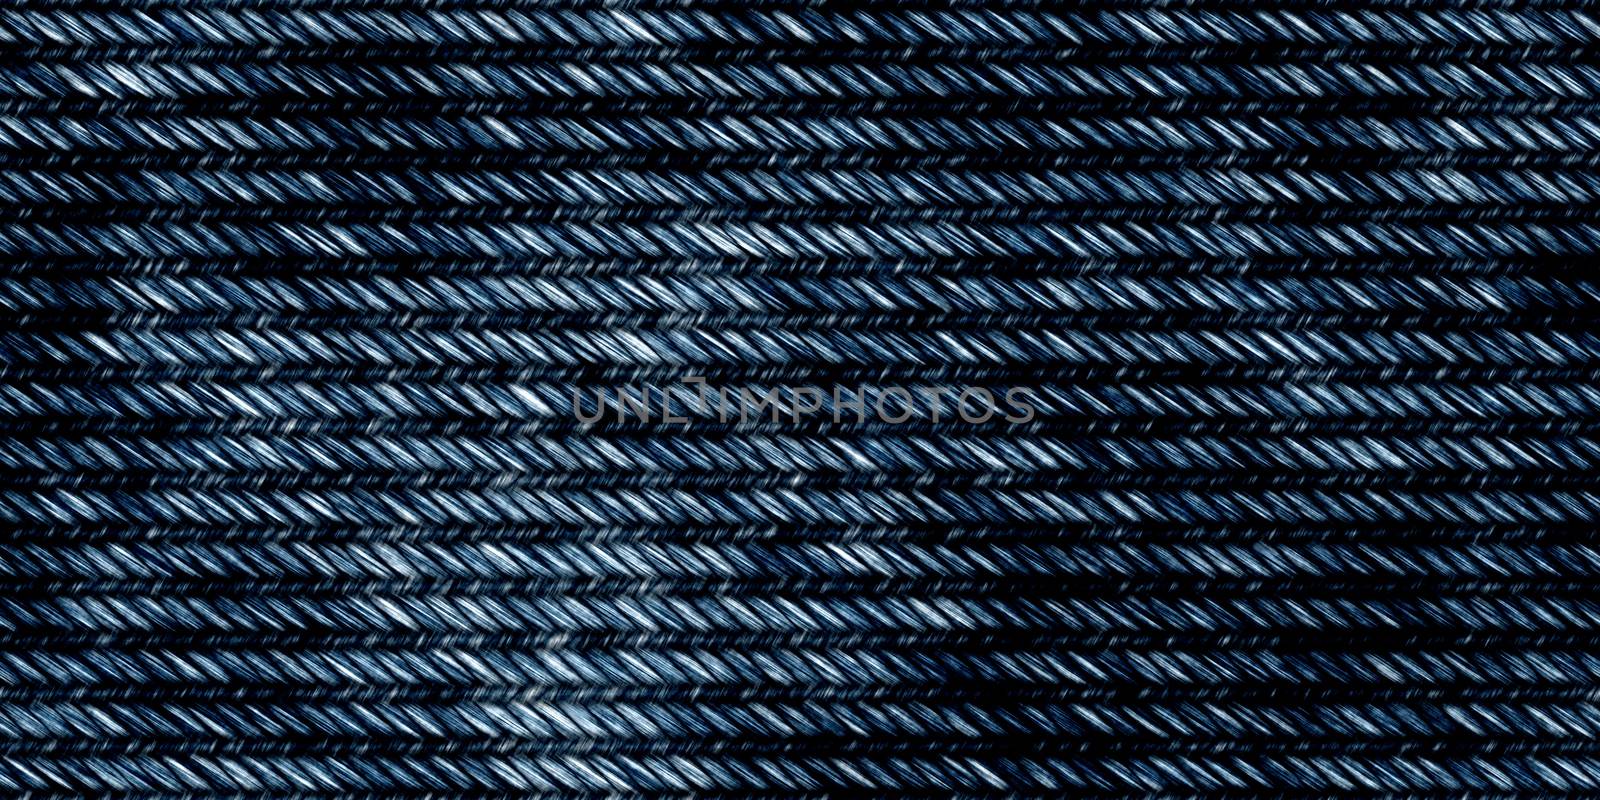 Blue Jeans Denim Seamless Textures. Textile Fabric Background. Jeans Clothing Material Surface. Grunge Wear Pattern. Macro Closeup. by sanches812